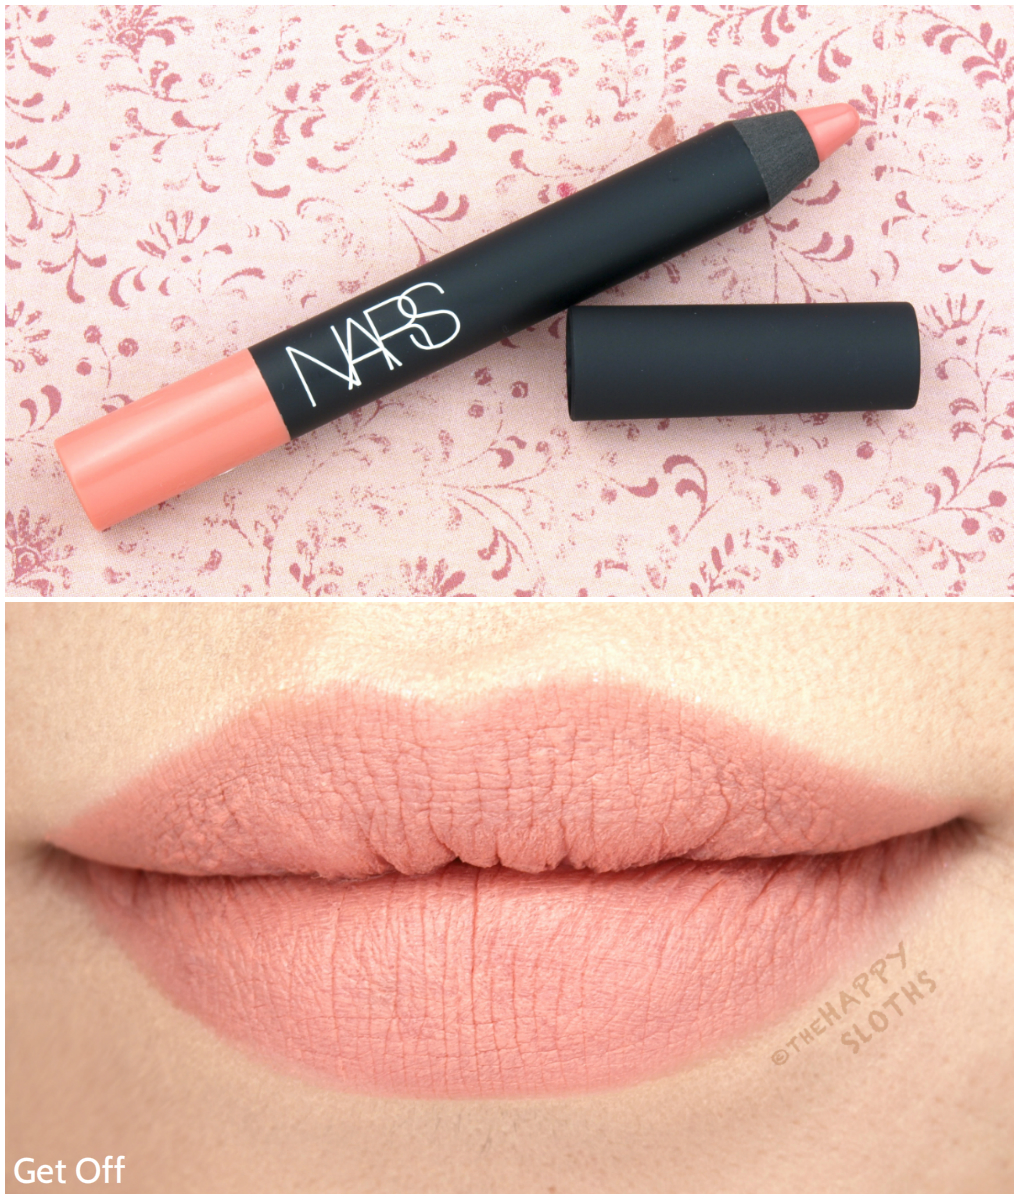 NARS Velvet Matte Lip Pencil in "Get Off": Review and Swatches